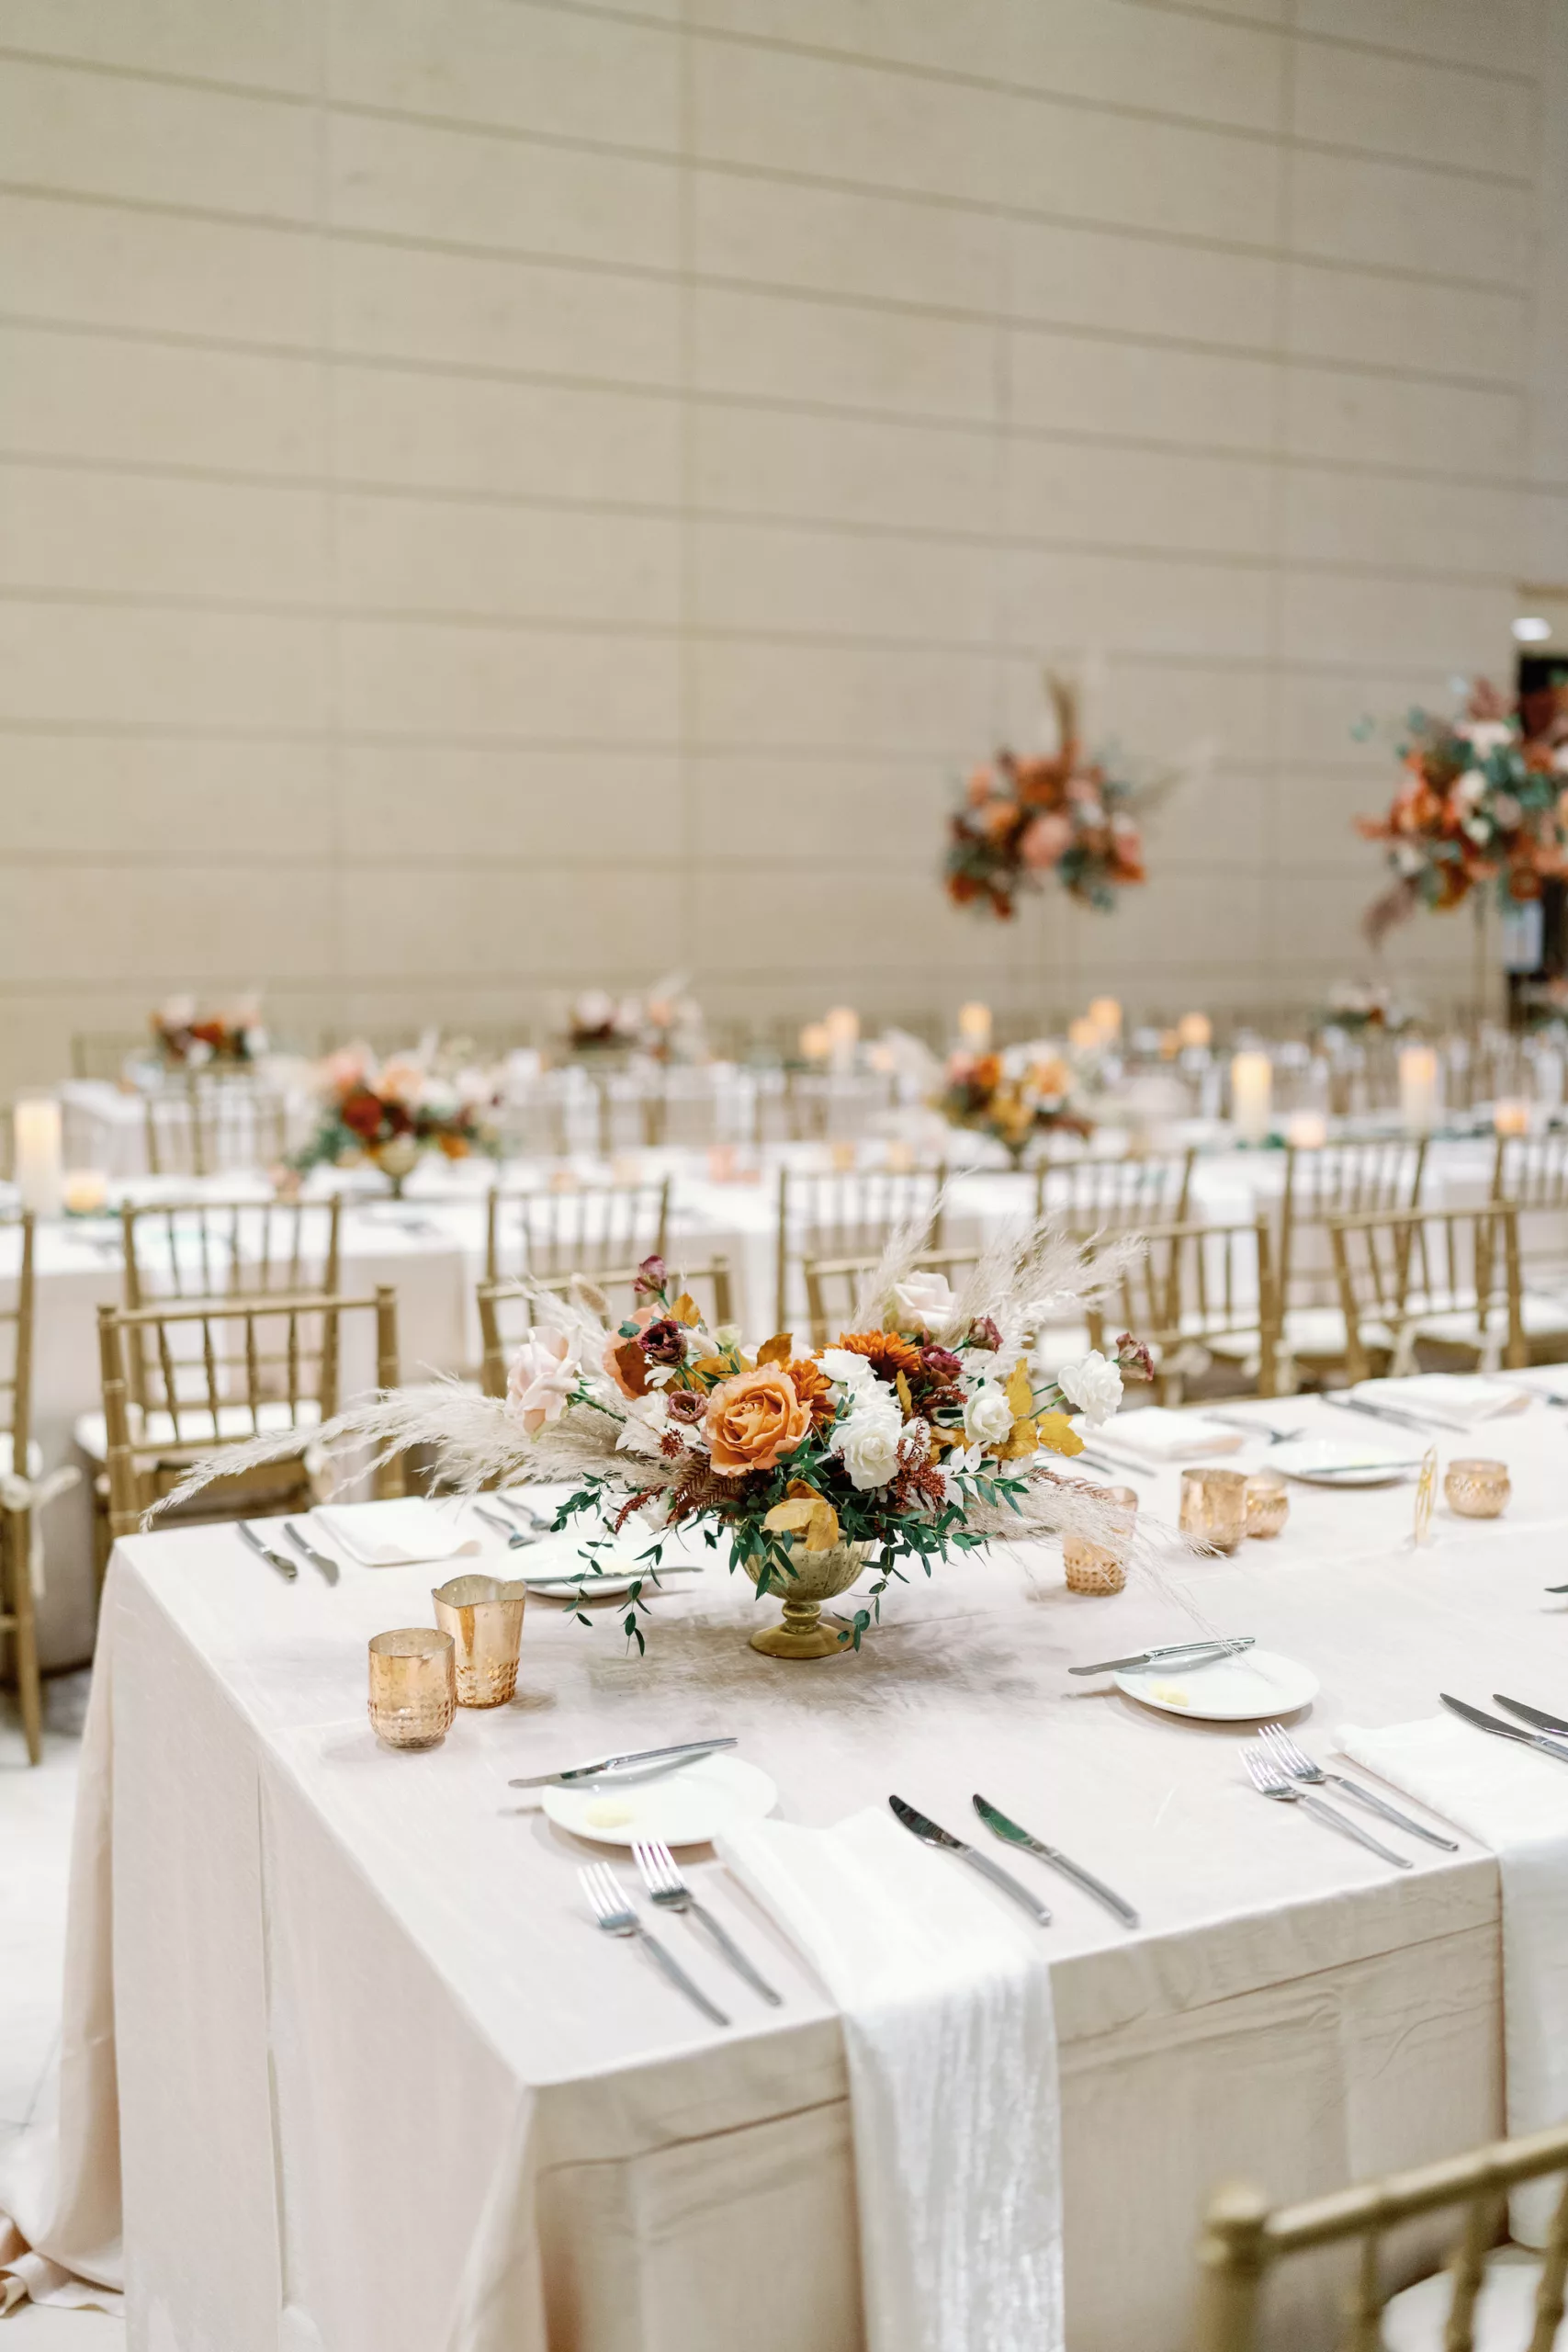 Luxurious Cream and Burnt Orange Boho Indian Wedding Reception Tablescape Decor Ideas | Long Feasting Tables | Dried Pampas Grass, Ferns, Brown Leaves and Gold Geometric Vase | Tampa Bay Event Planner Coastal Coordinating | St Pete Venue Museum of Fine Arts | Caterer Olympia Catering